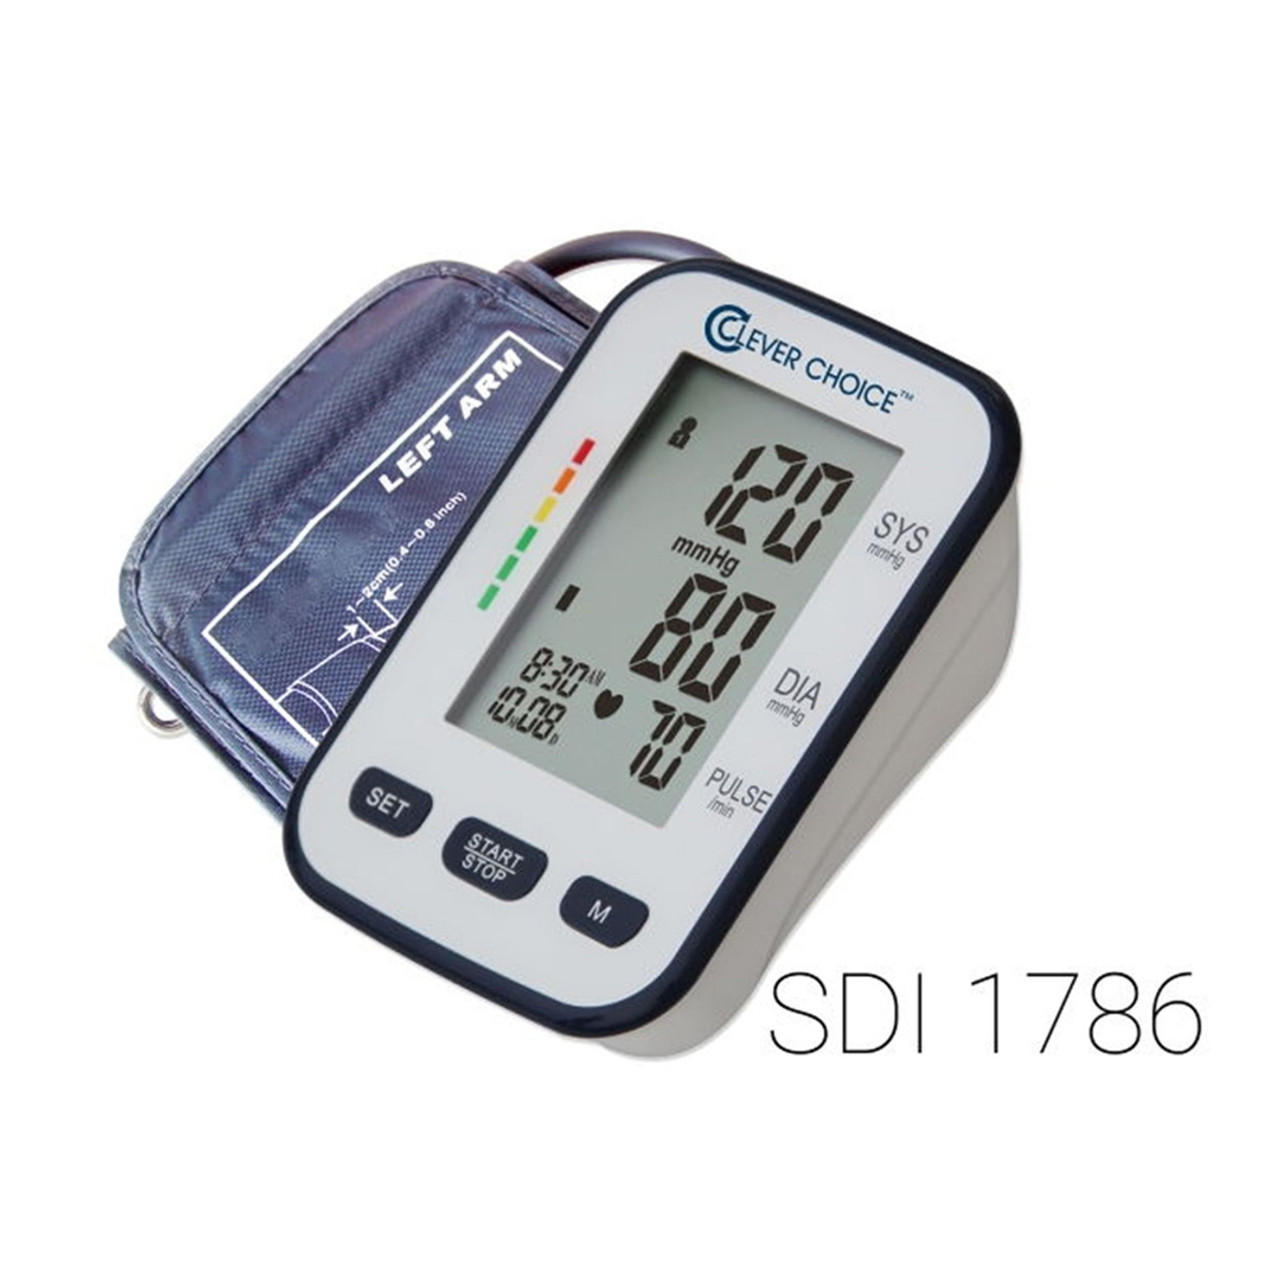 Best blood pressure monitor. How to choose the blood pressure